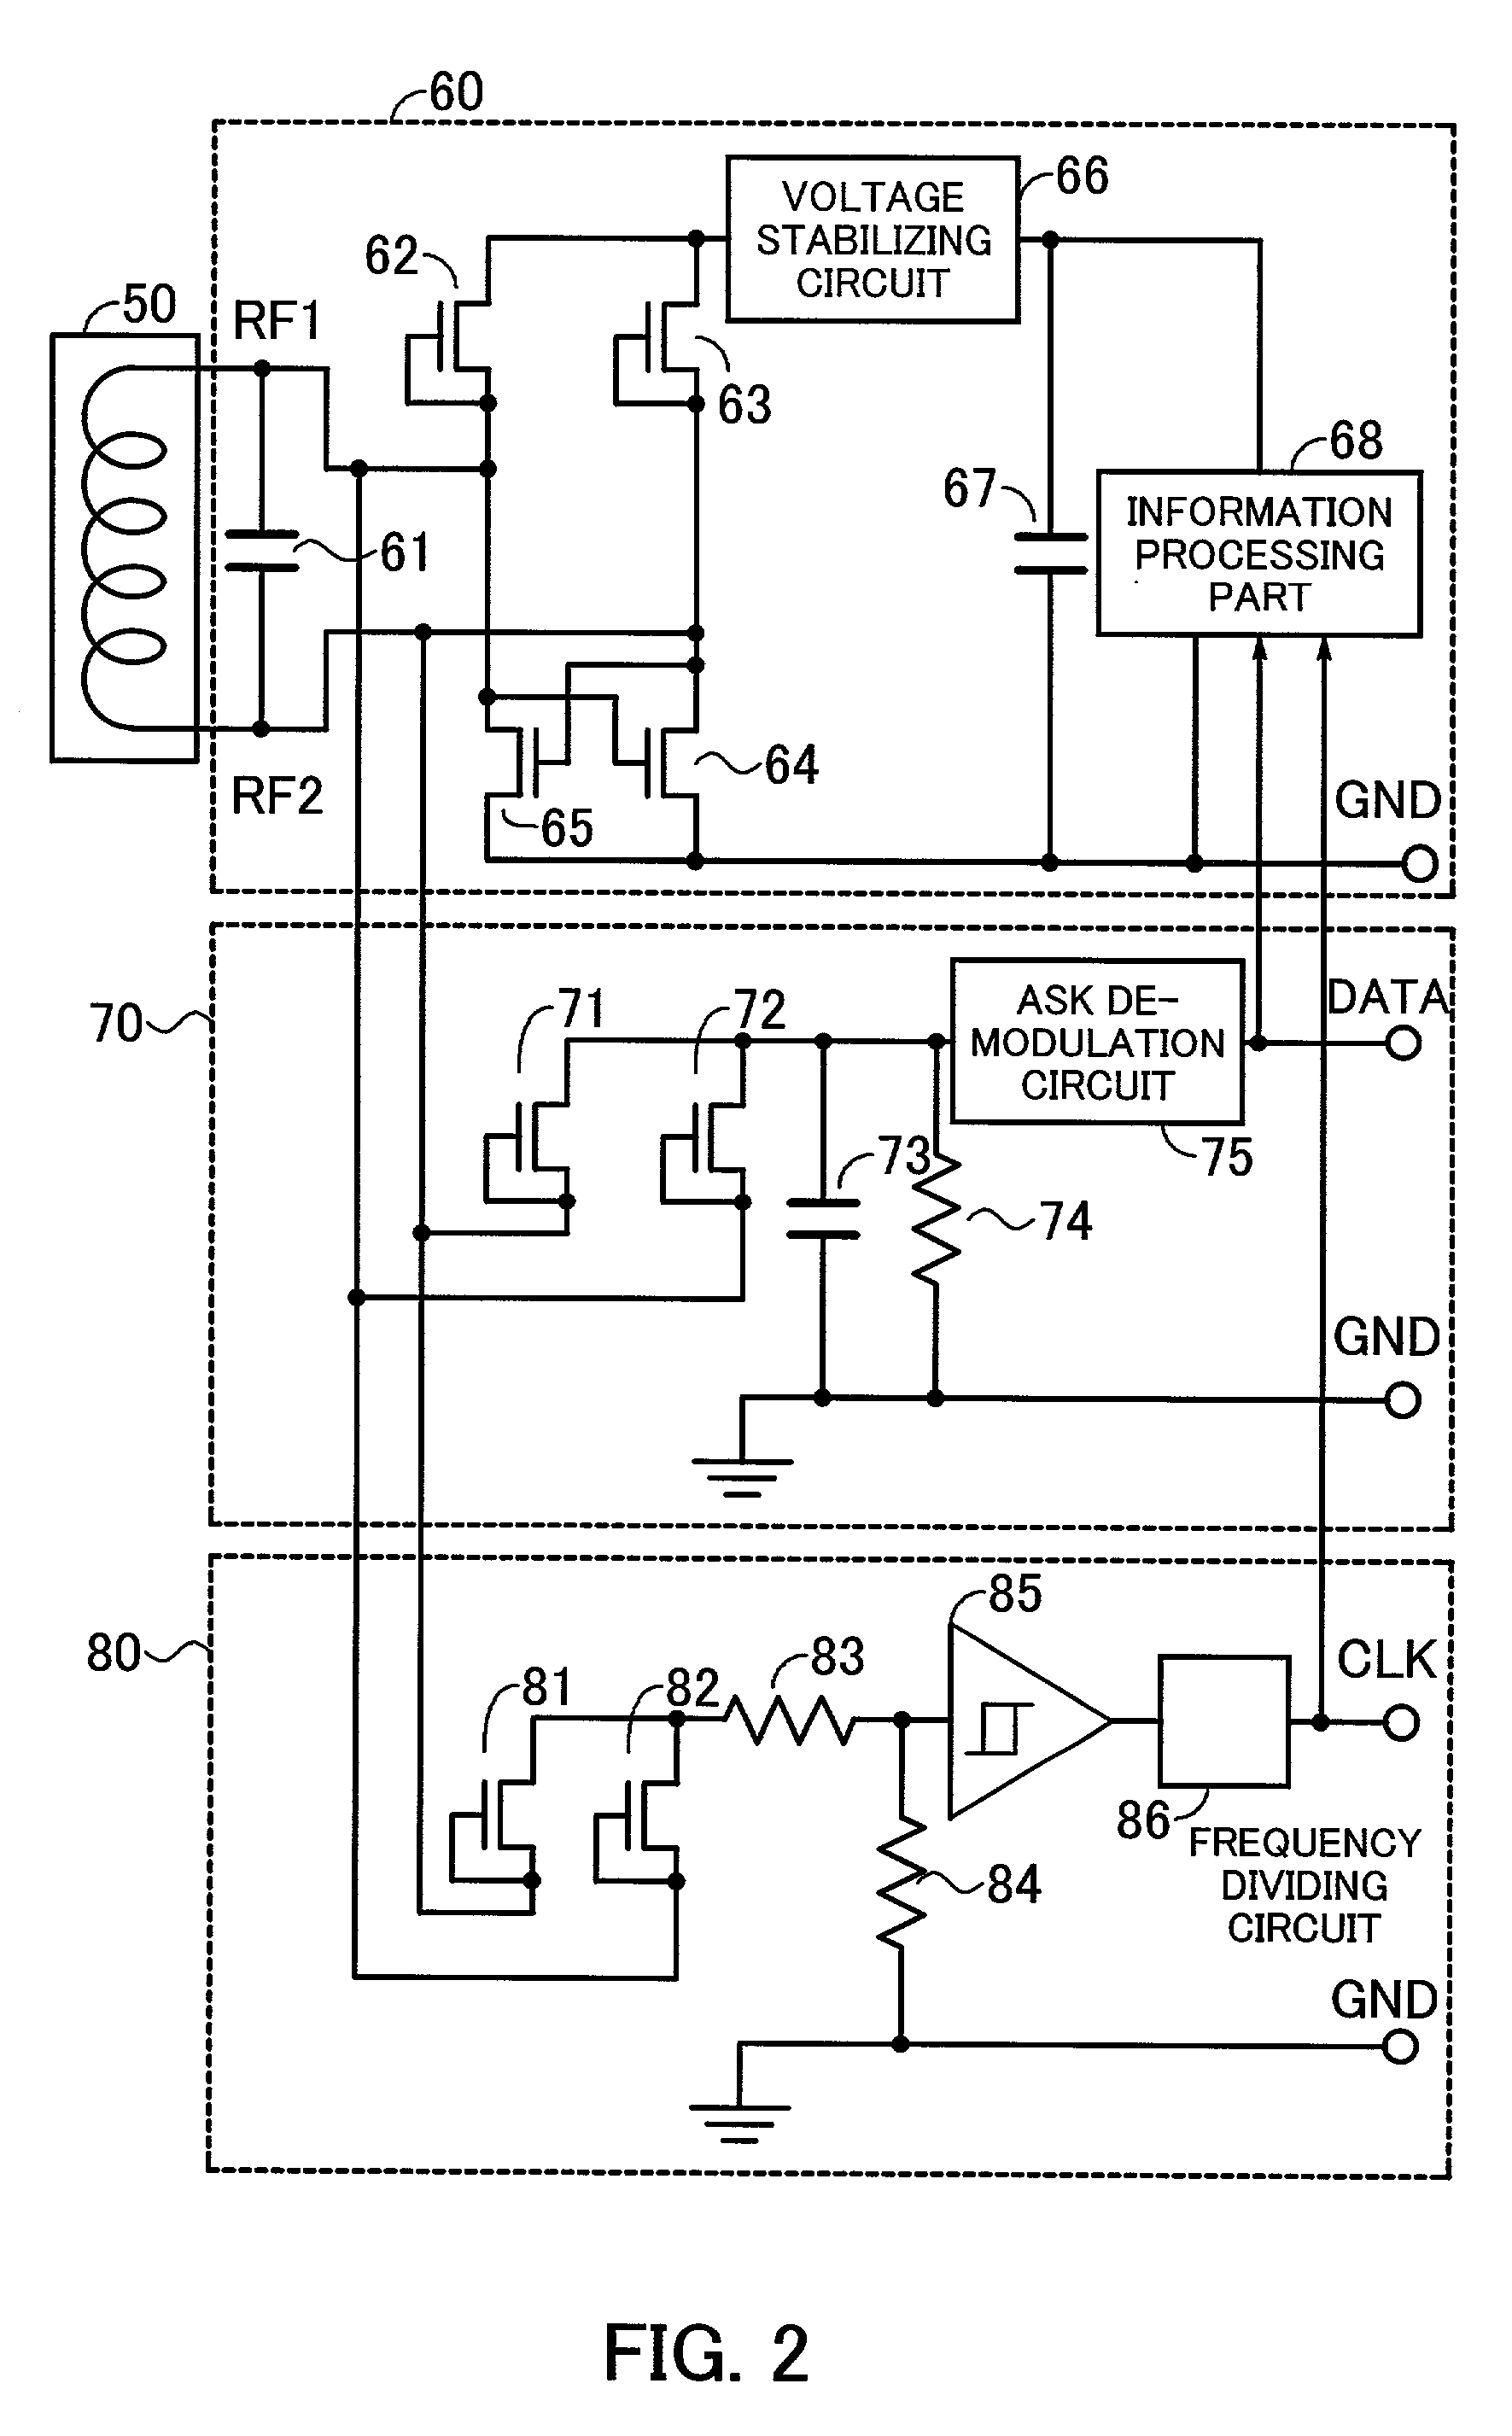 Contactless apparatus and card-type device having clock rectifier that is independent of power rectifier and demodulator with RC time constant based on selectable resistor